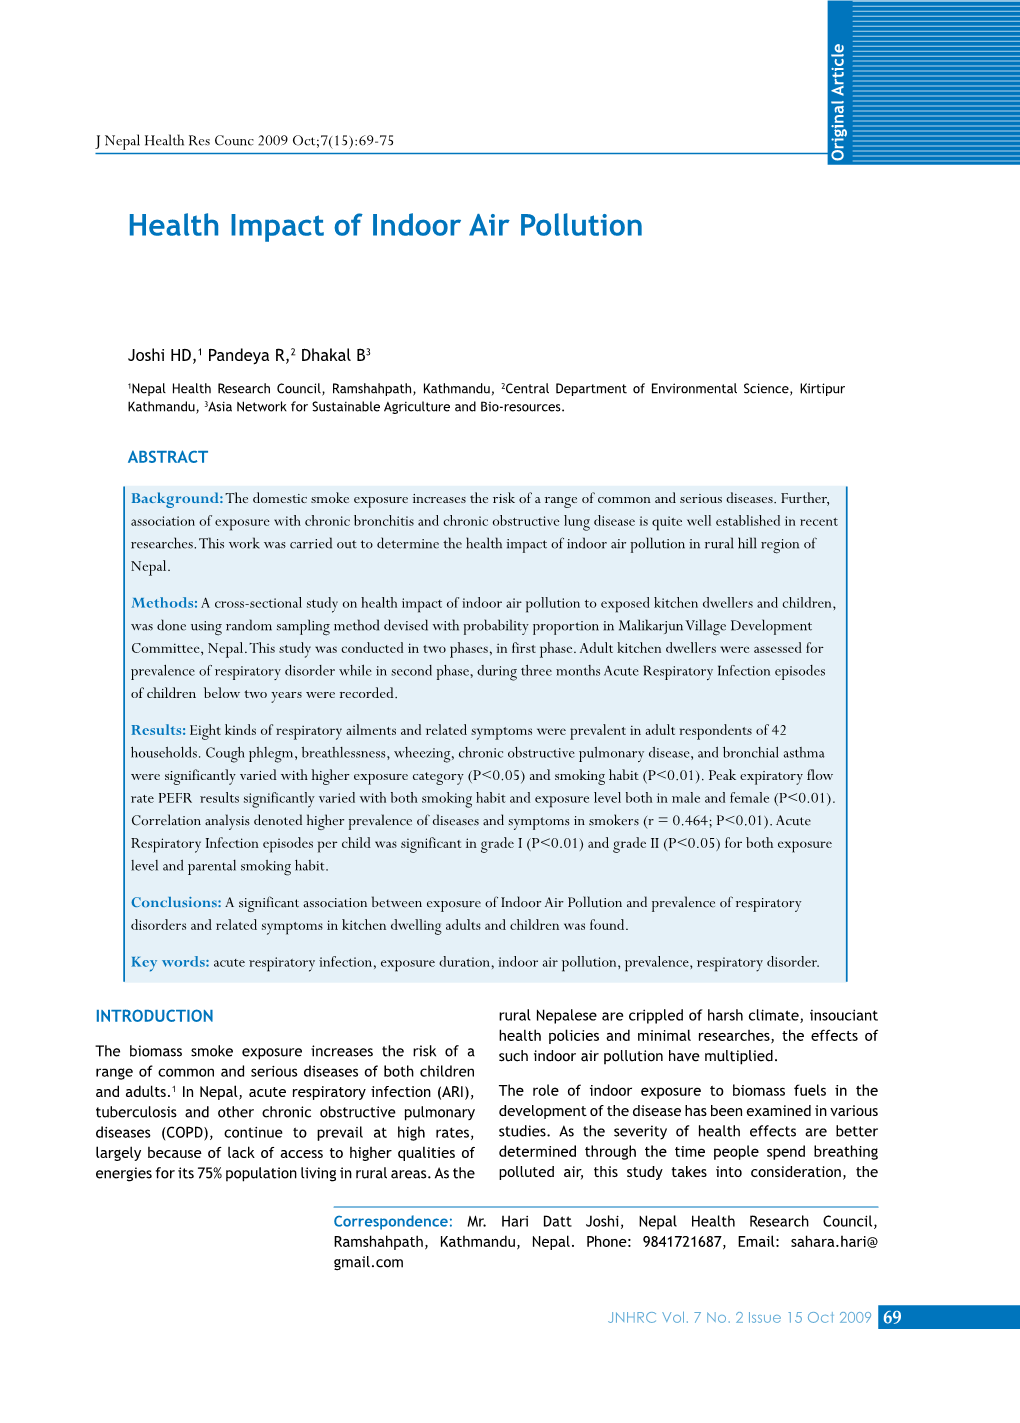 Health Impact of Indoor Air Pollution